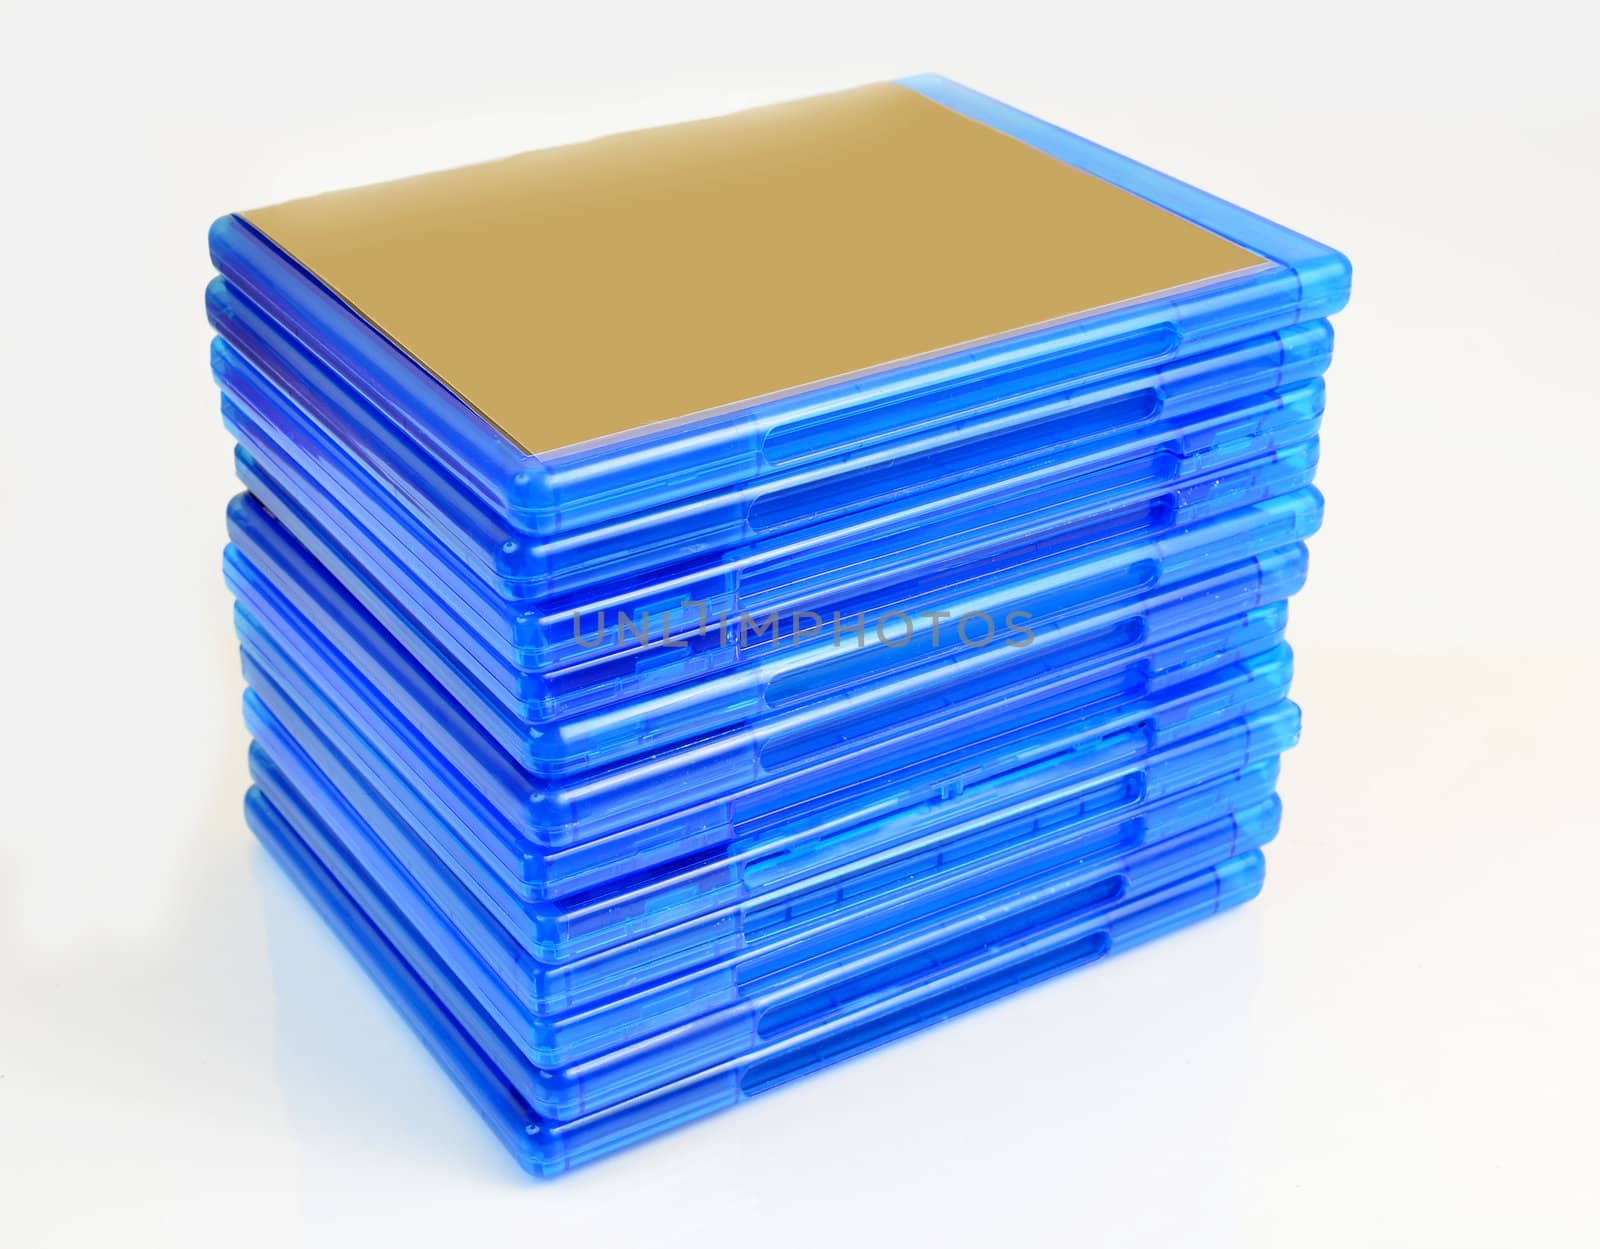 Pile of Blu Ray disc boxes isolated on white background